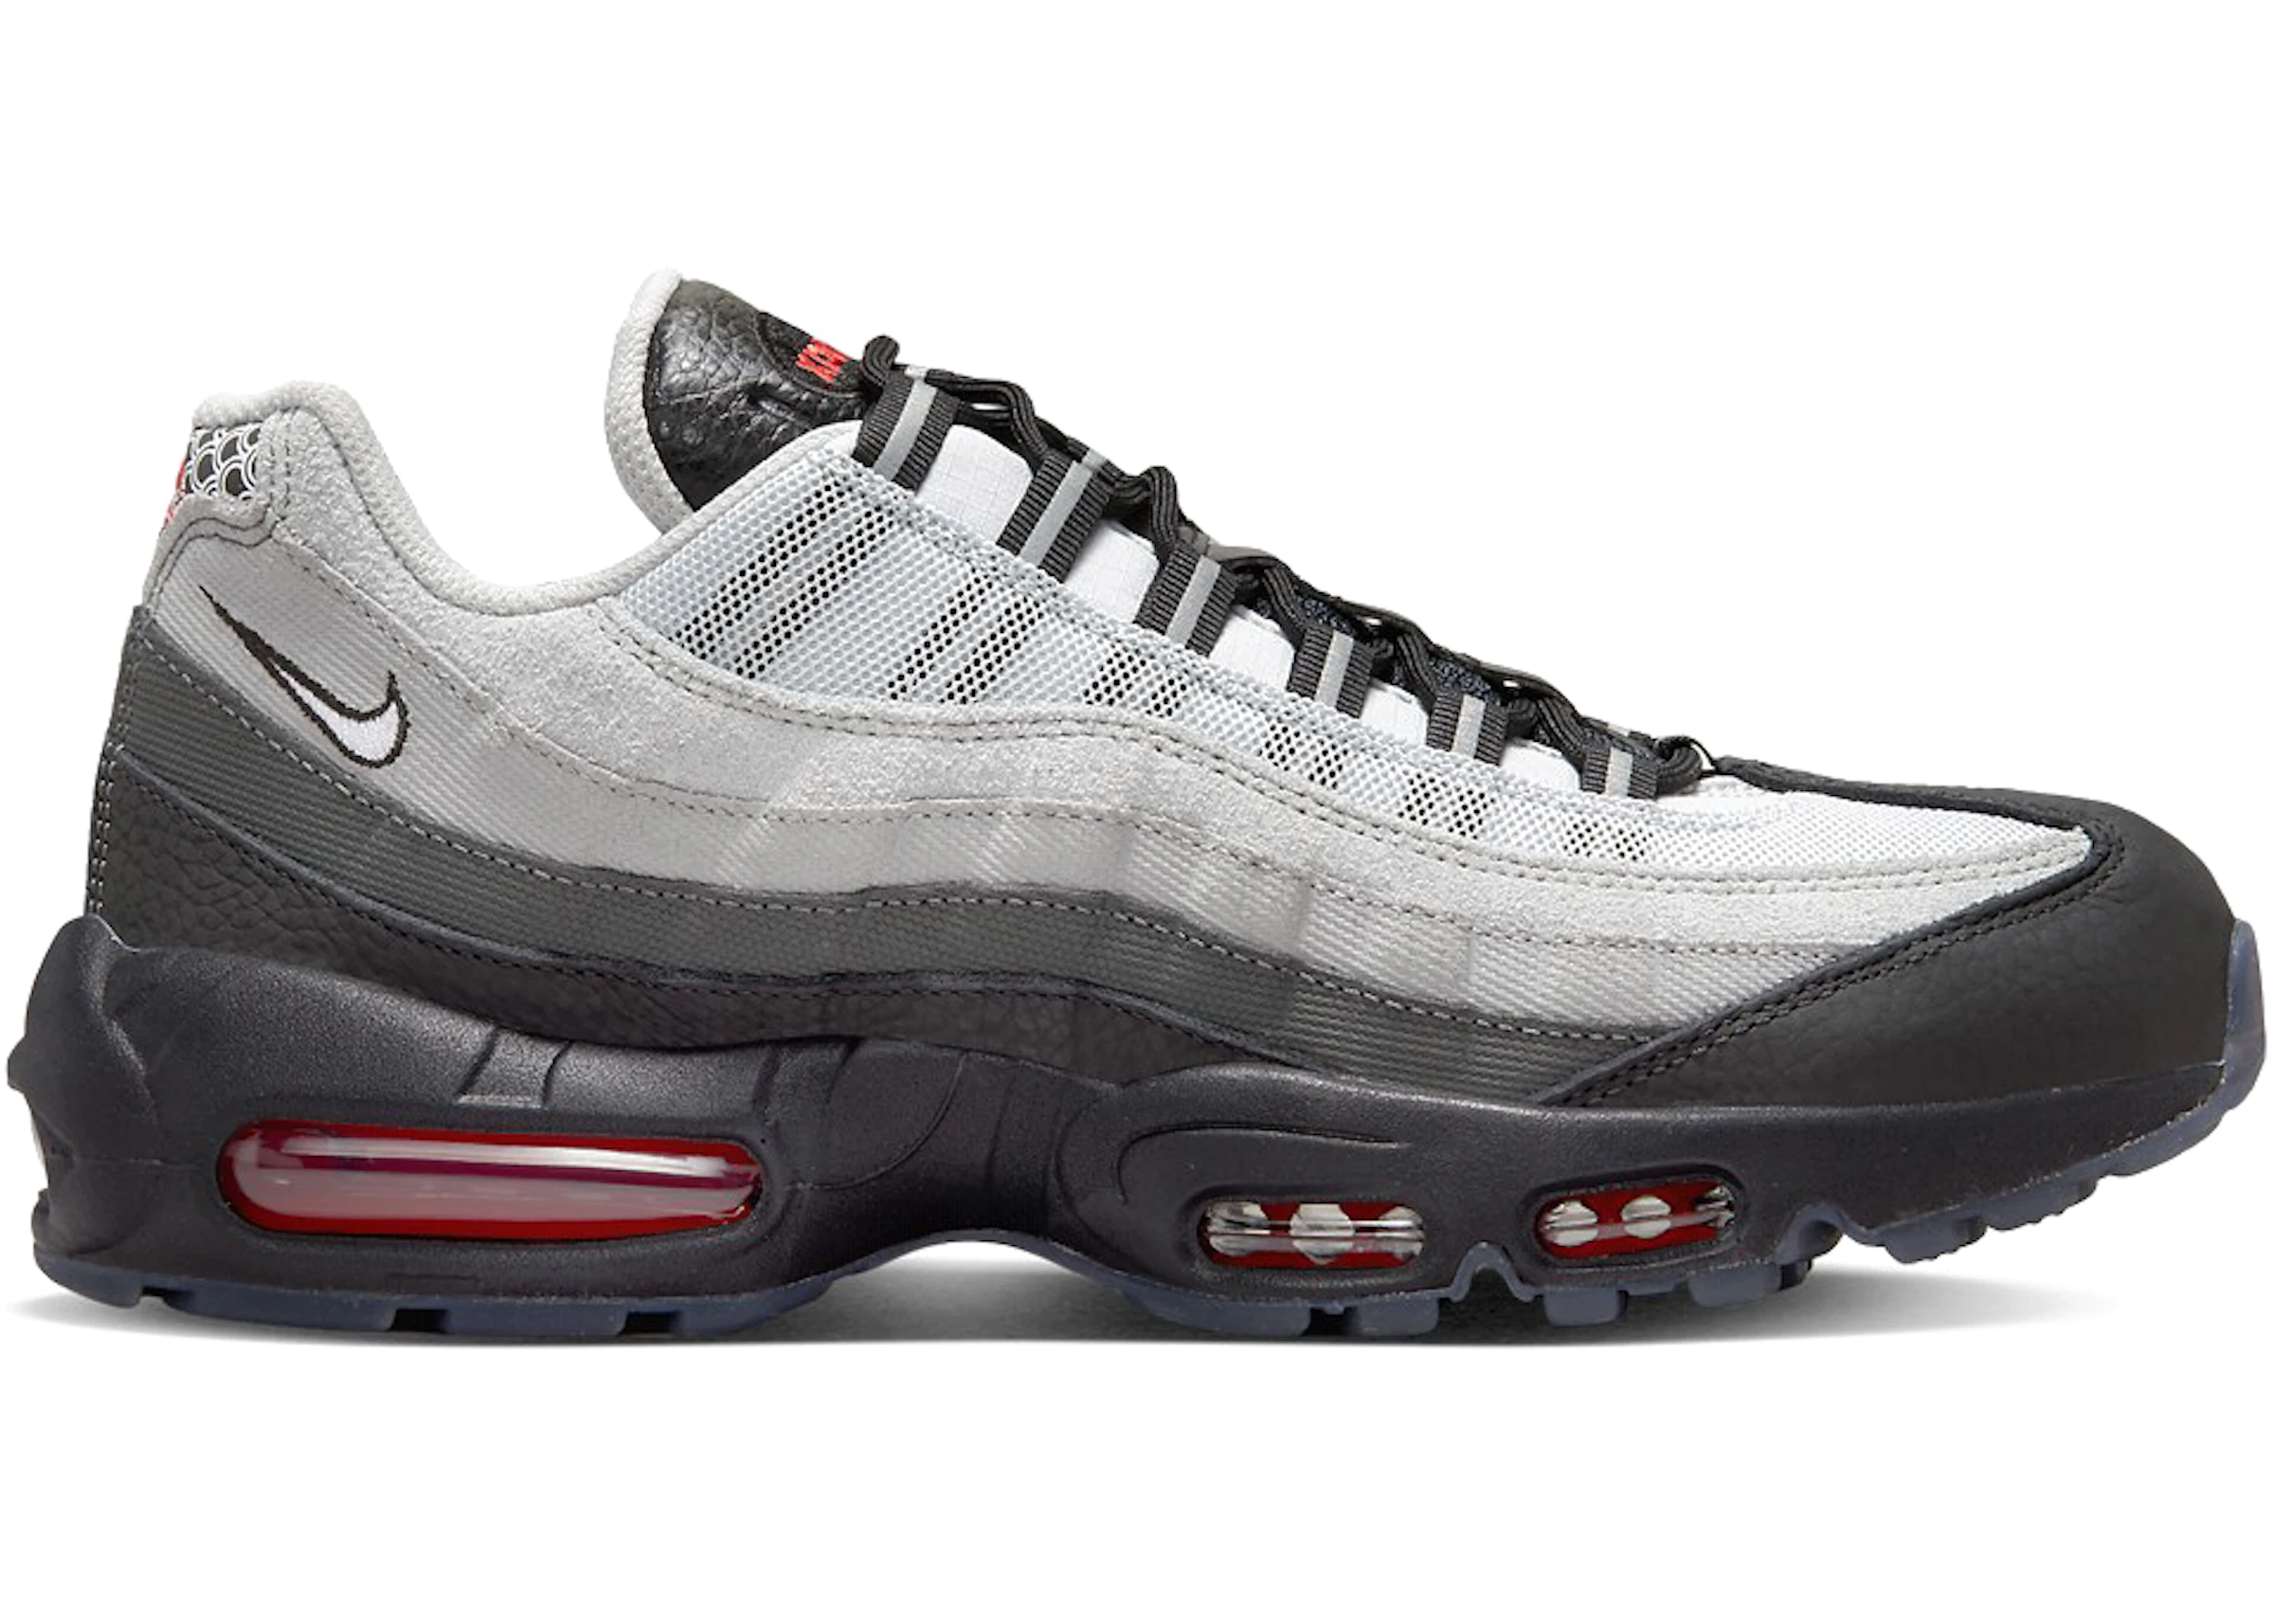 Go up experimental paper Buy Nike Air Max 95 Shoes & New Sneakers - StockX